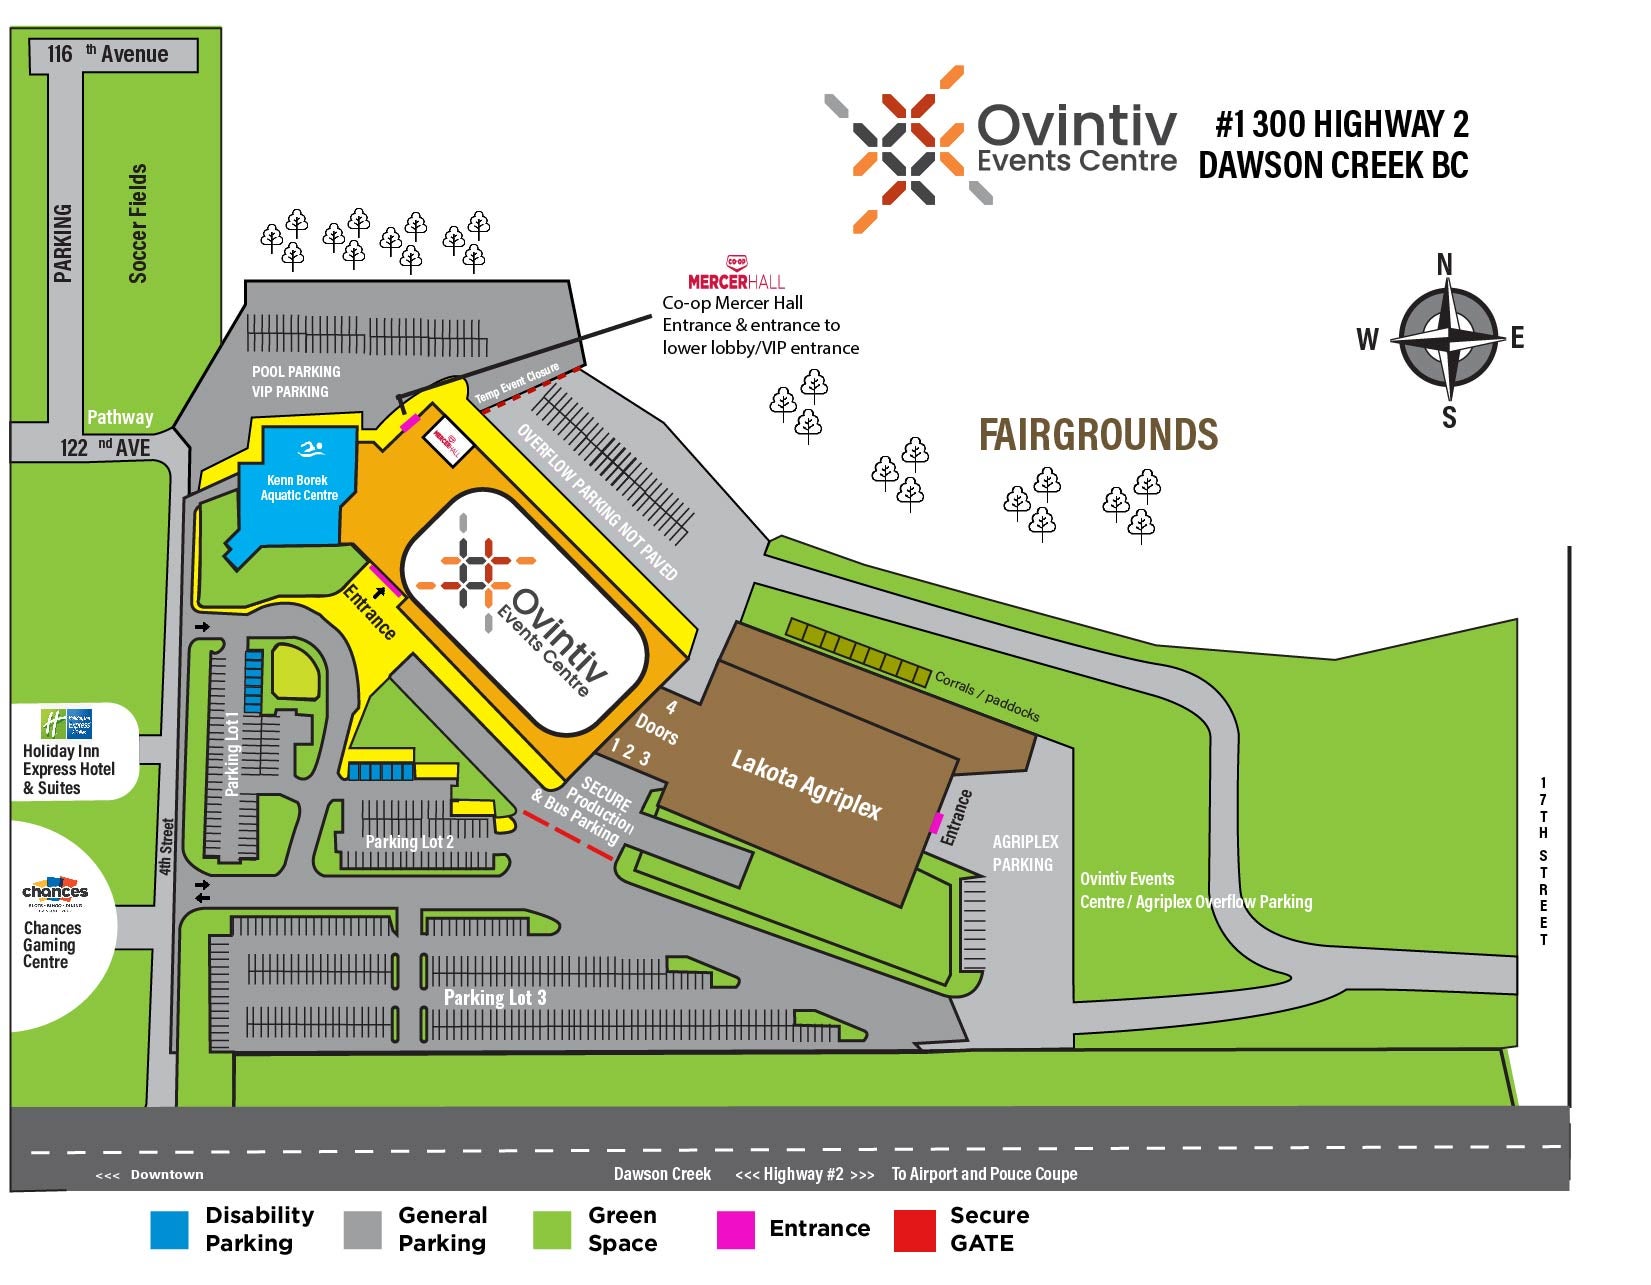 OEC Parking Lot MAP Parking and Access Routes Rev June 2021.jpg